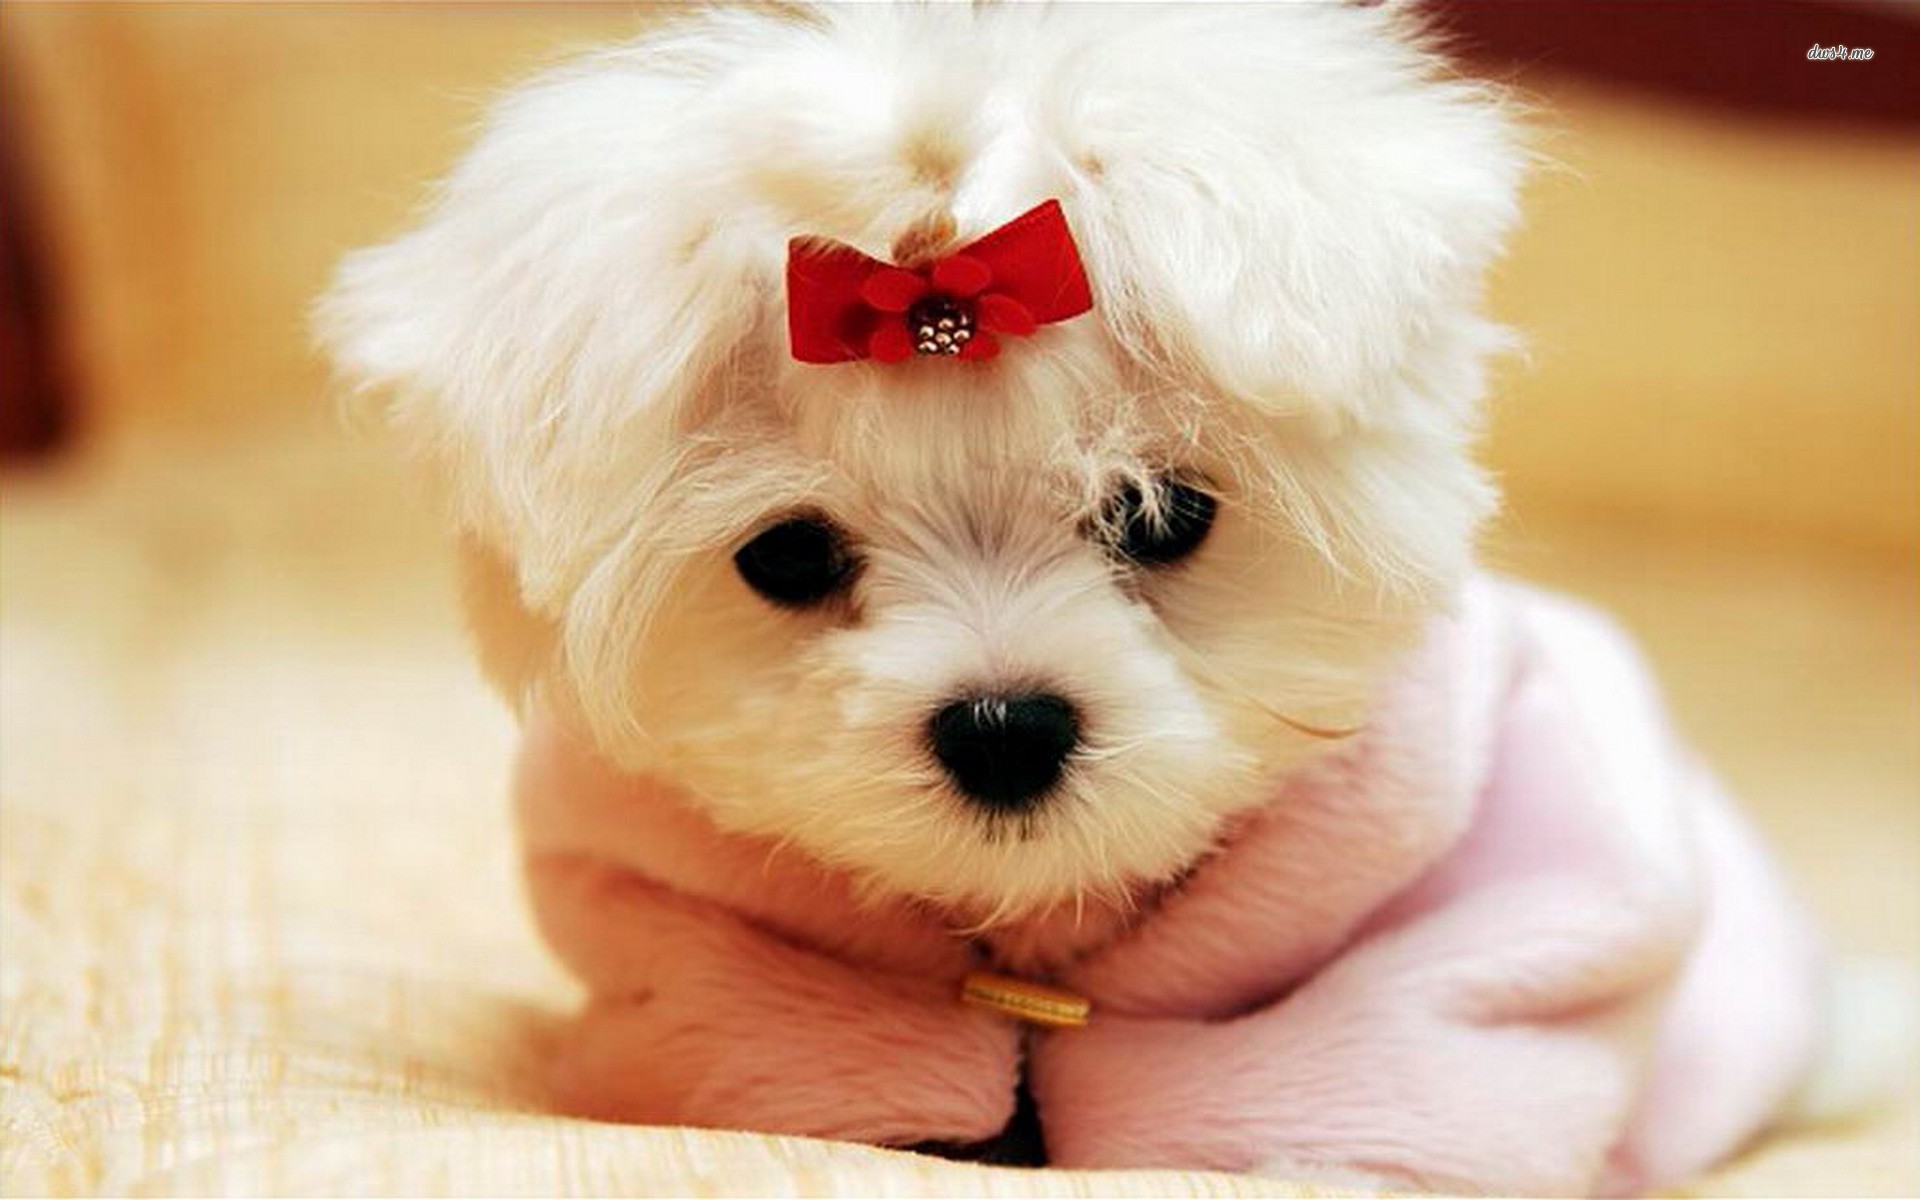 17 Cute Puppies That Are Really Cute Image - uk.bleumoonproductions